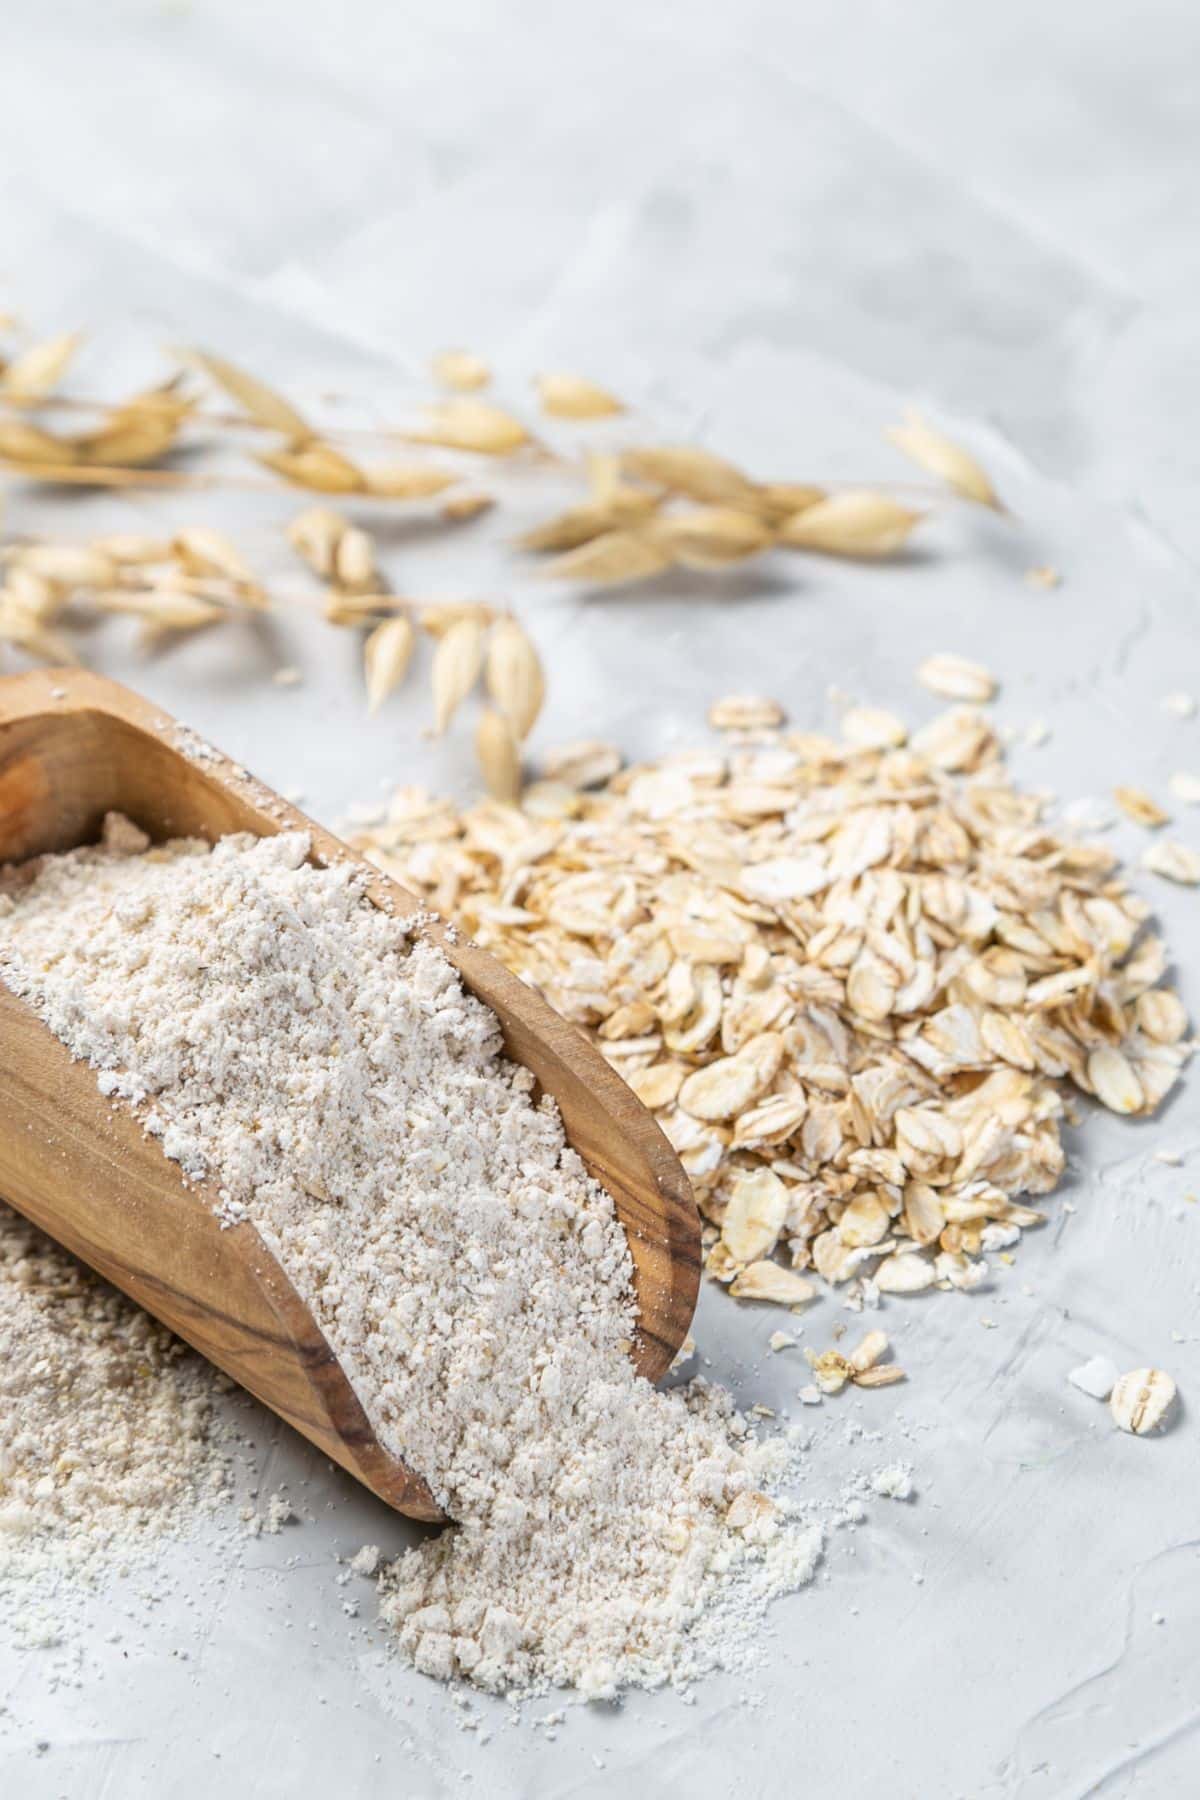 Oats on a counter next to a scoop of fresh ground oat flour.